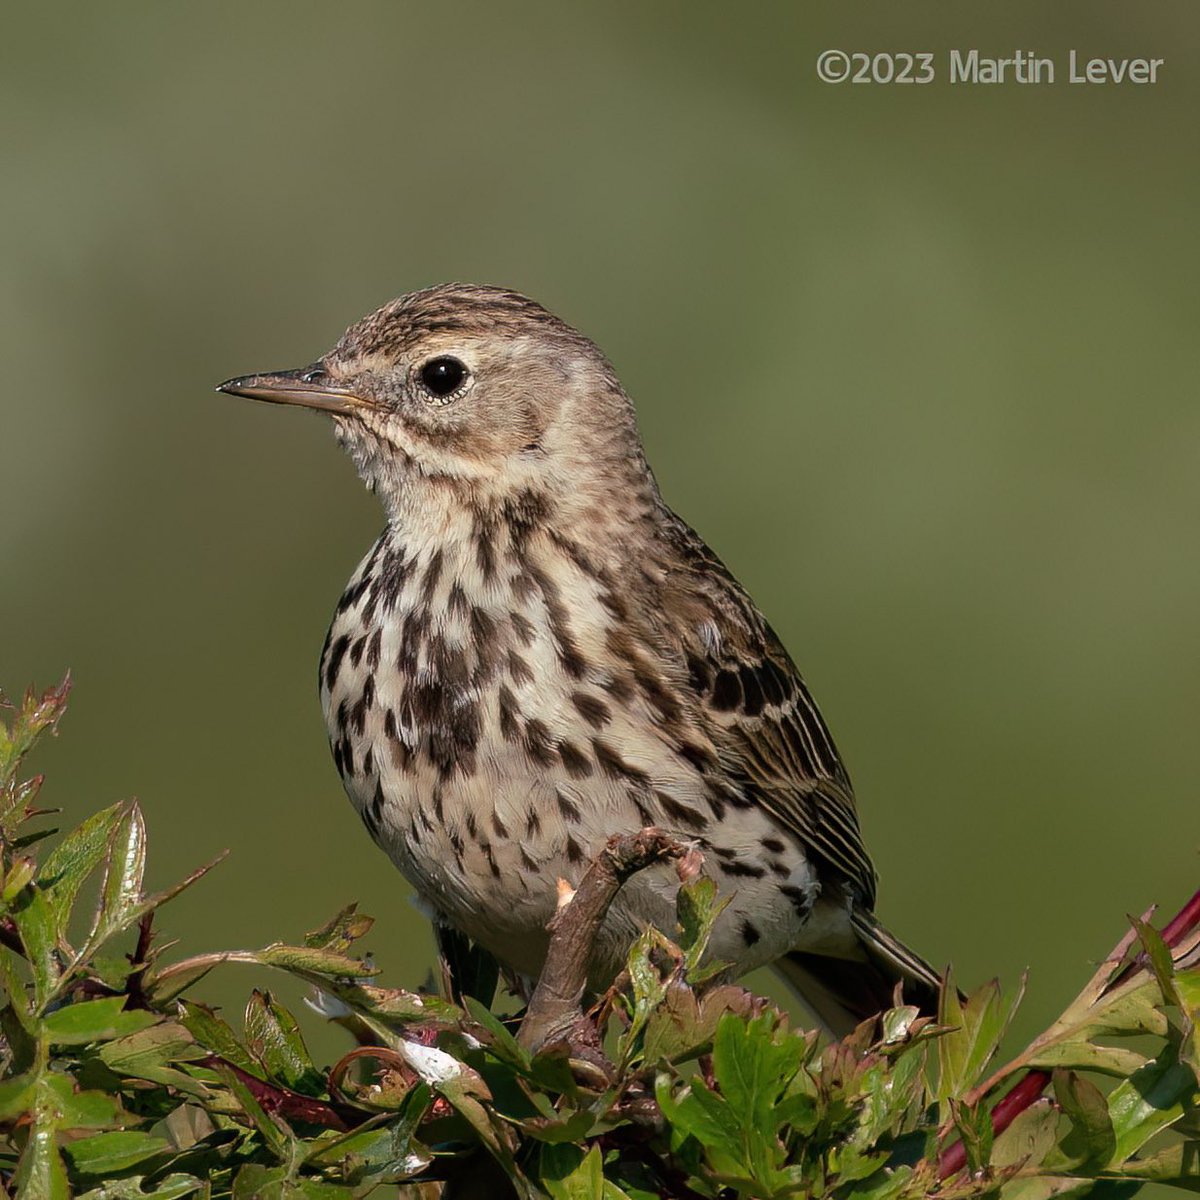 #MeadowPipit at Cothelstone Hill this evening #Quantocks #Somerset